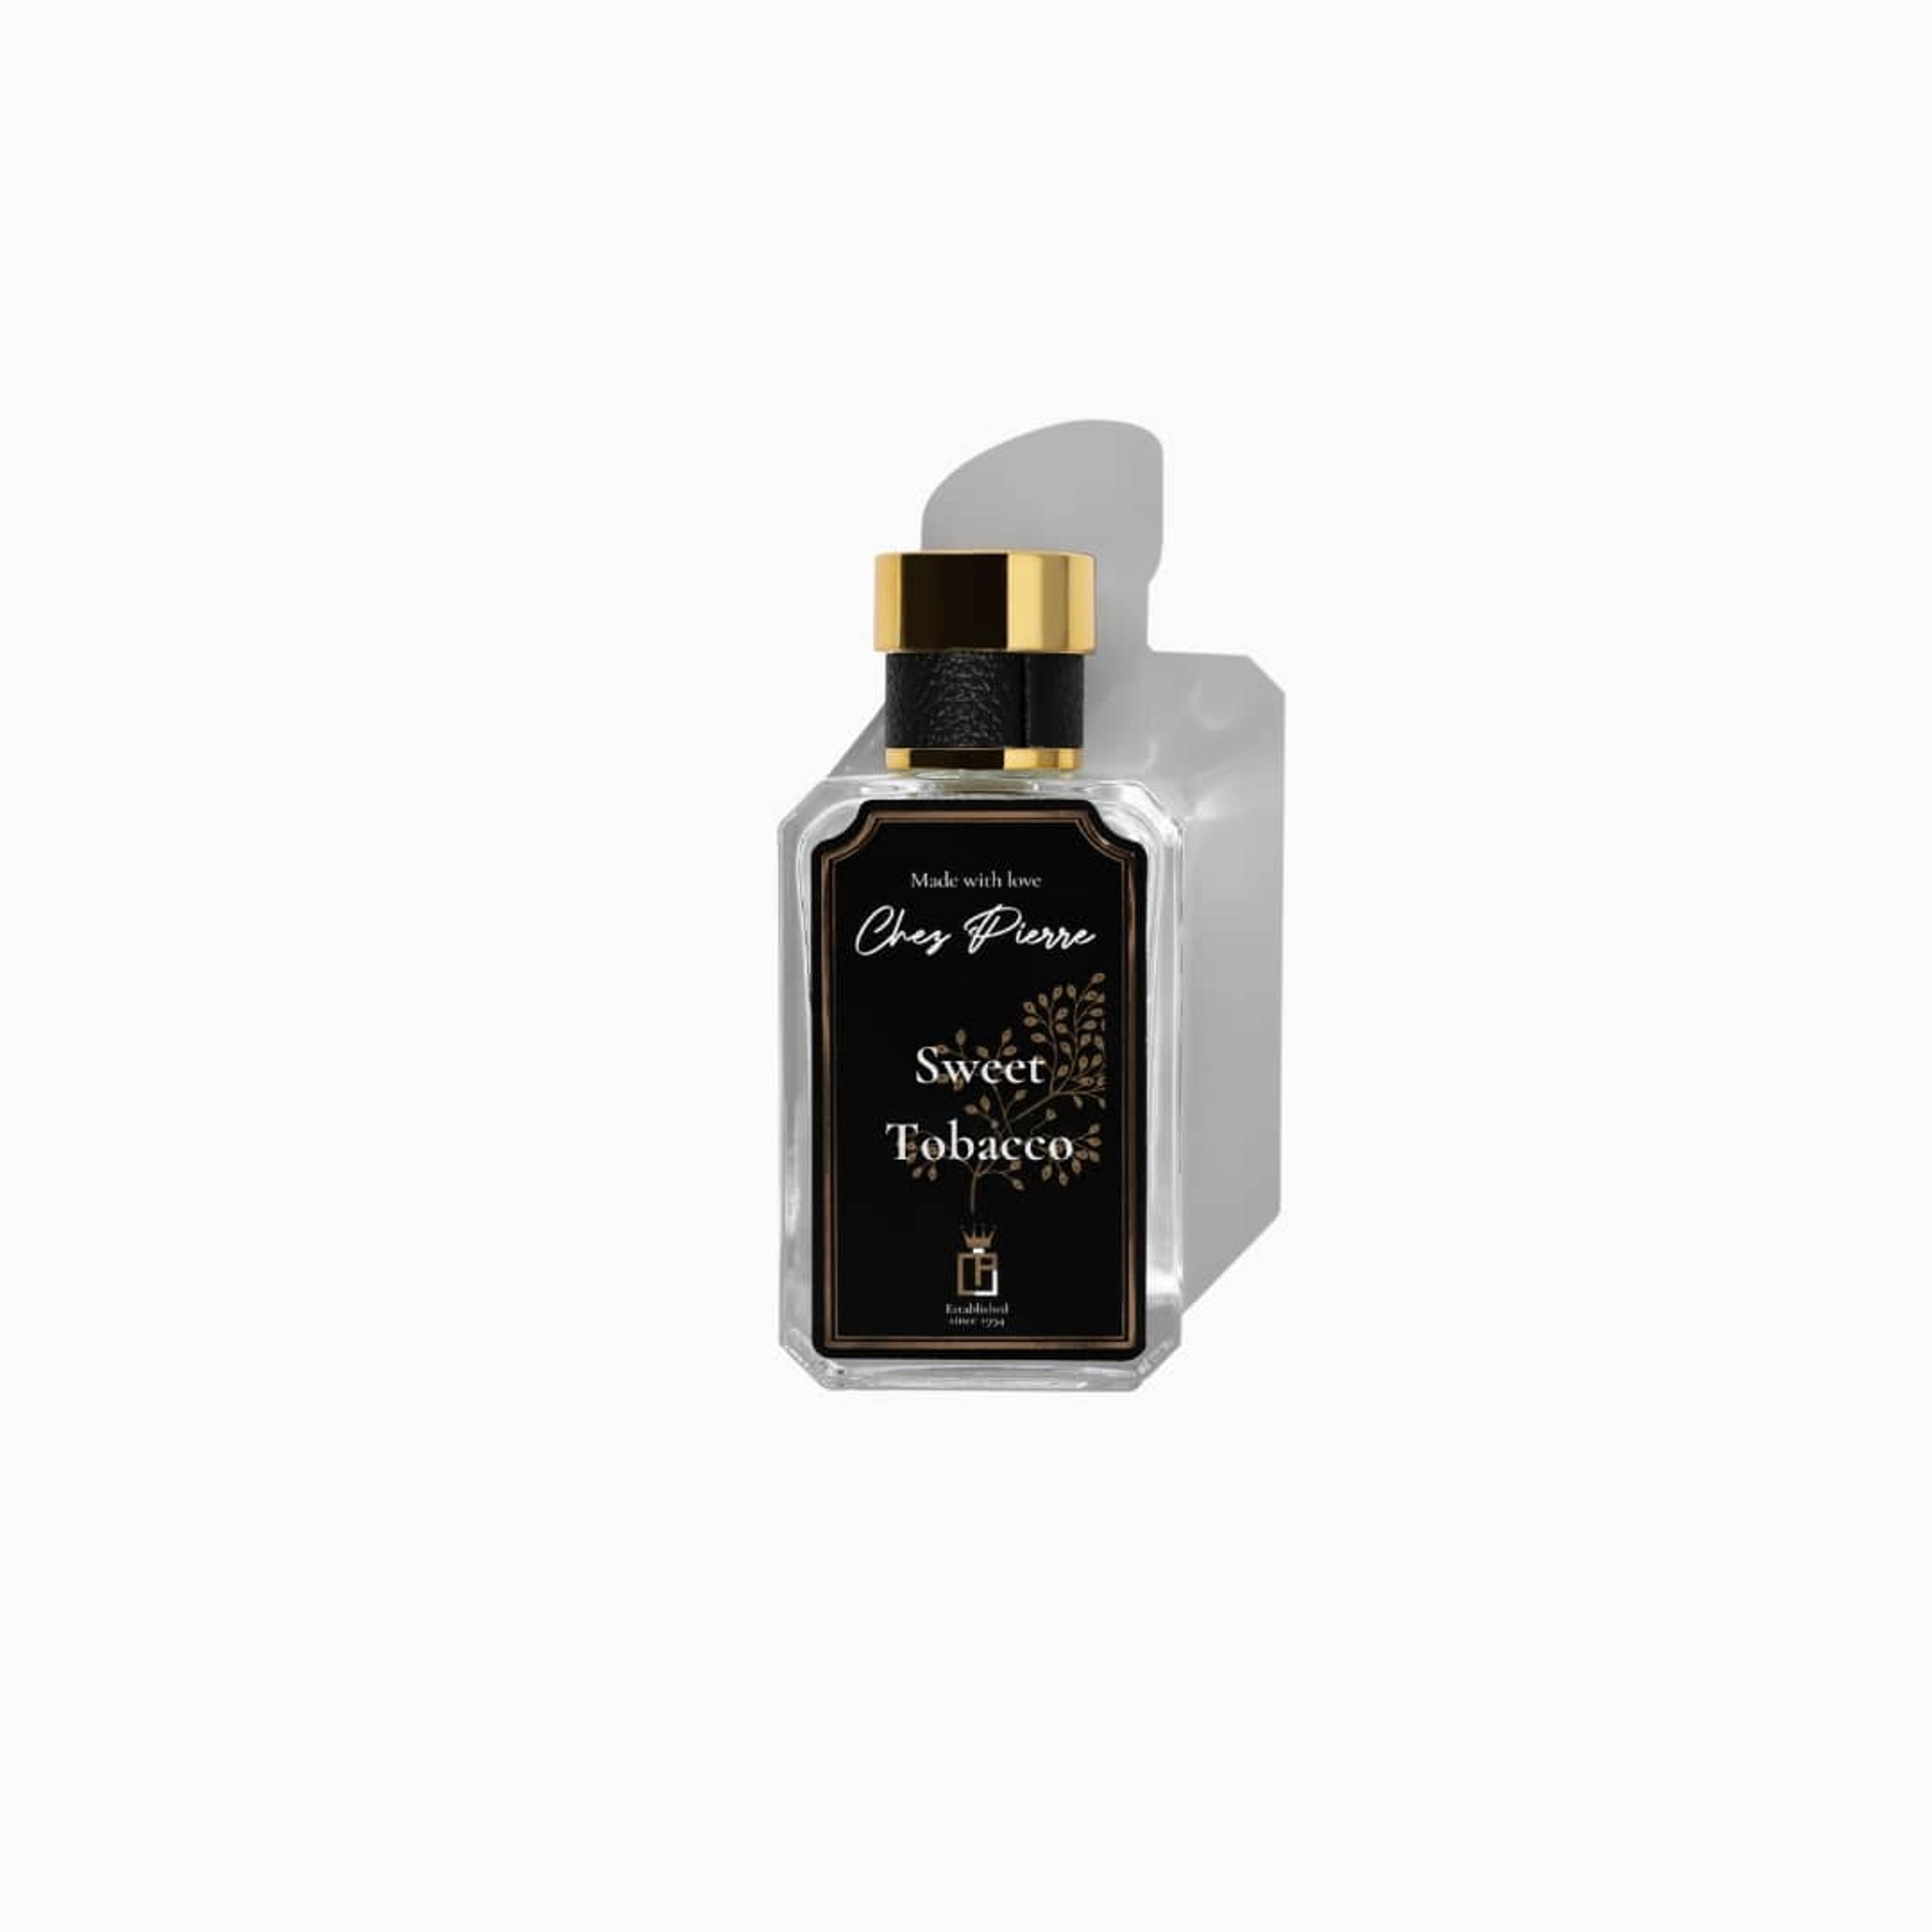 Chez Pierre's Sweet Tobacco Perfume Inspired By Tobacolor